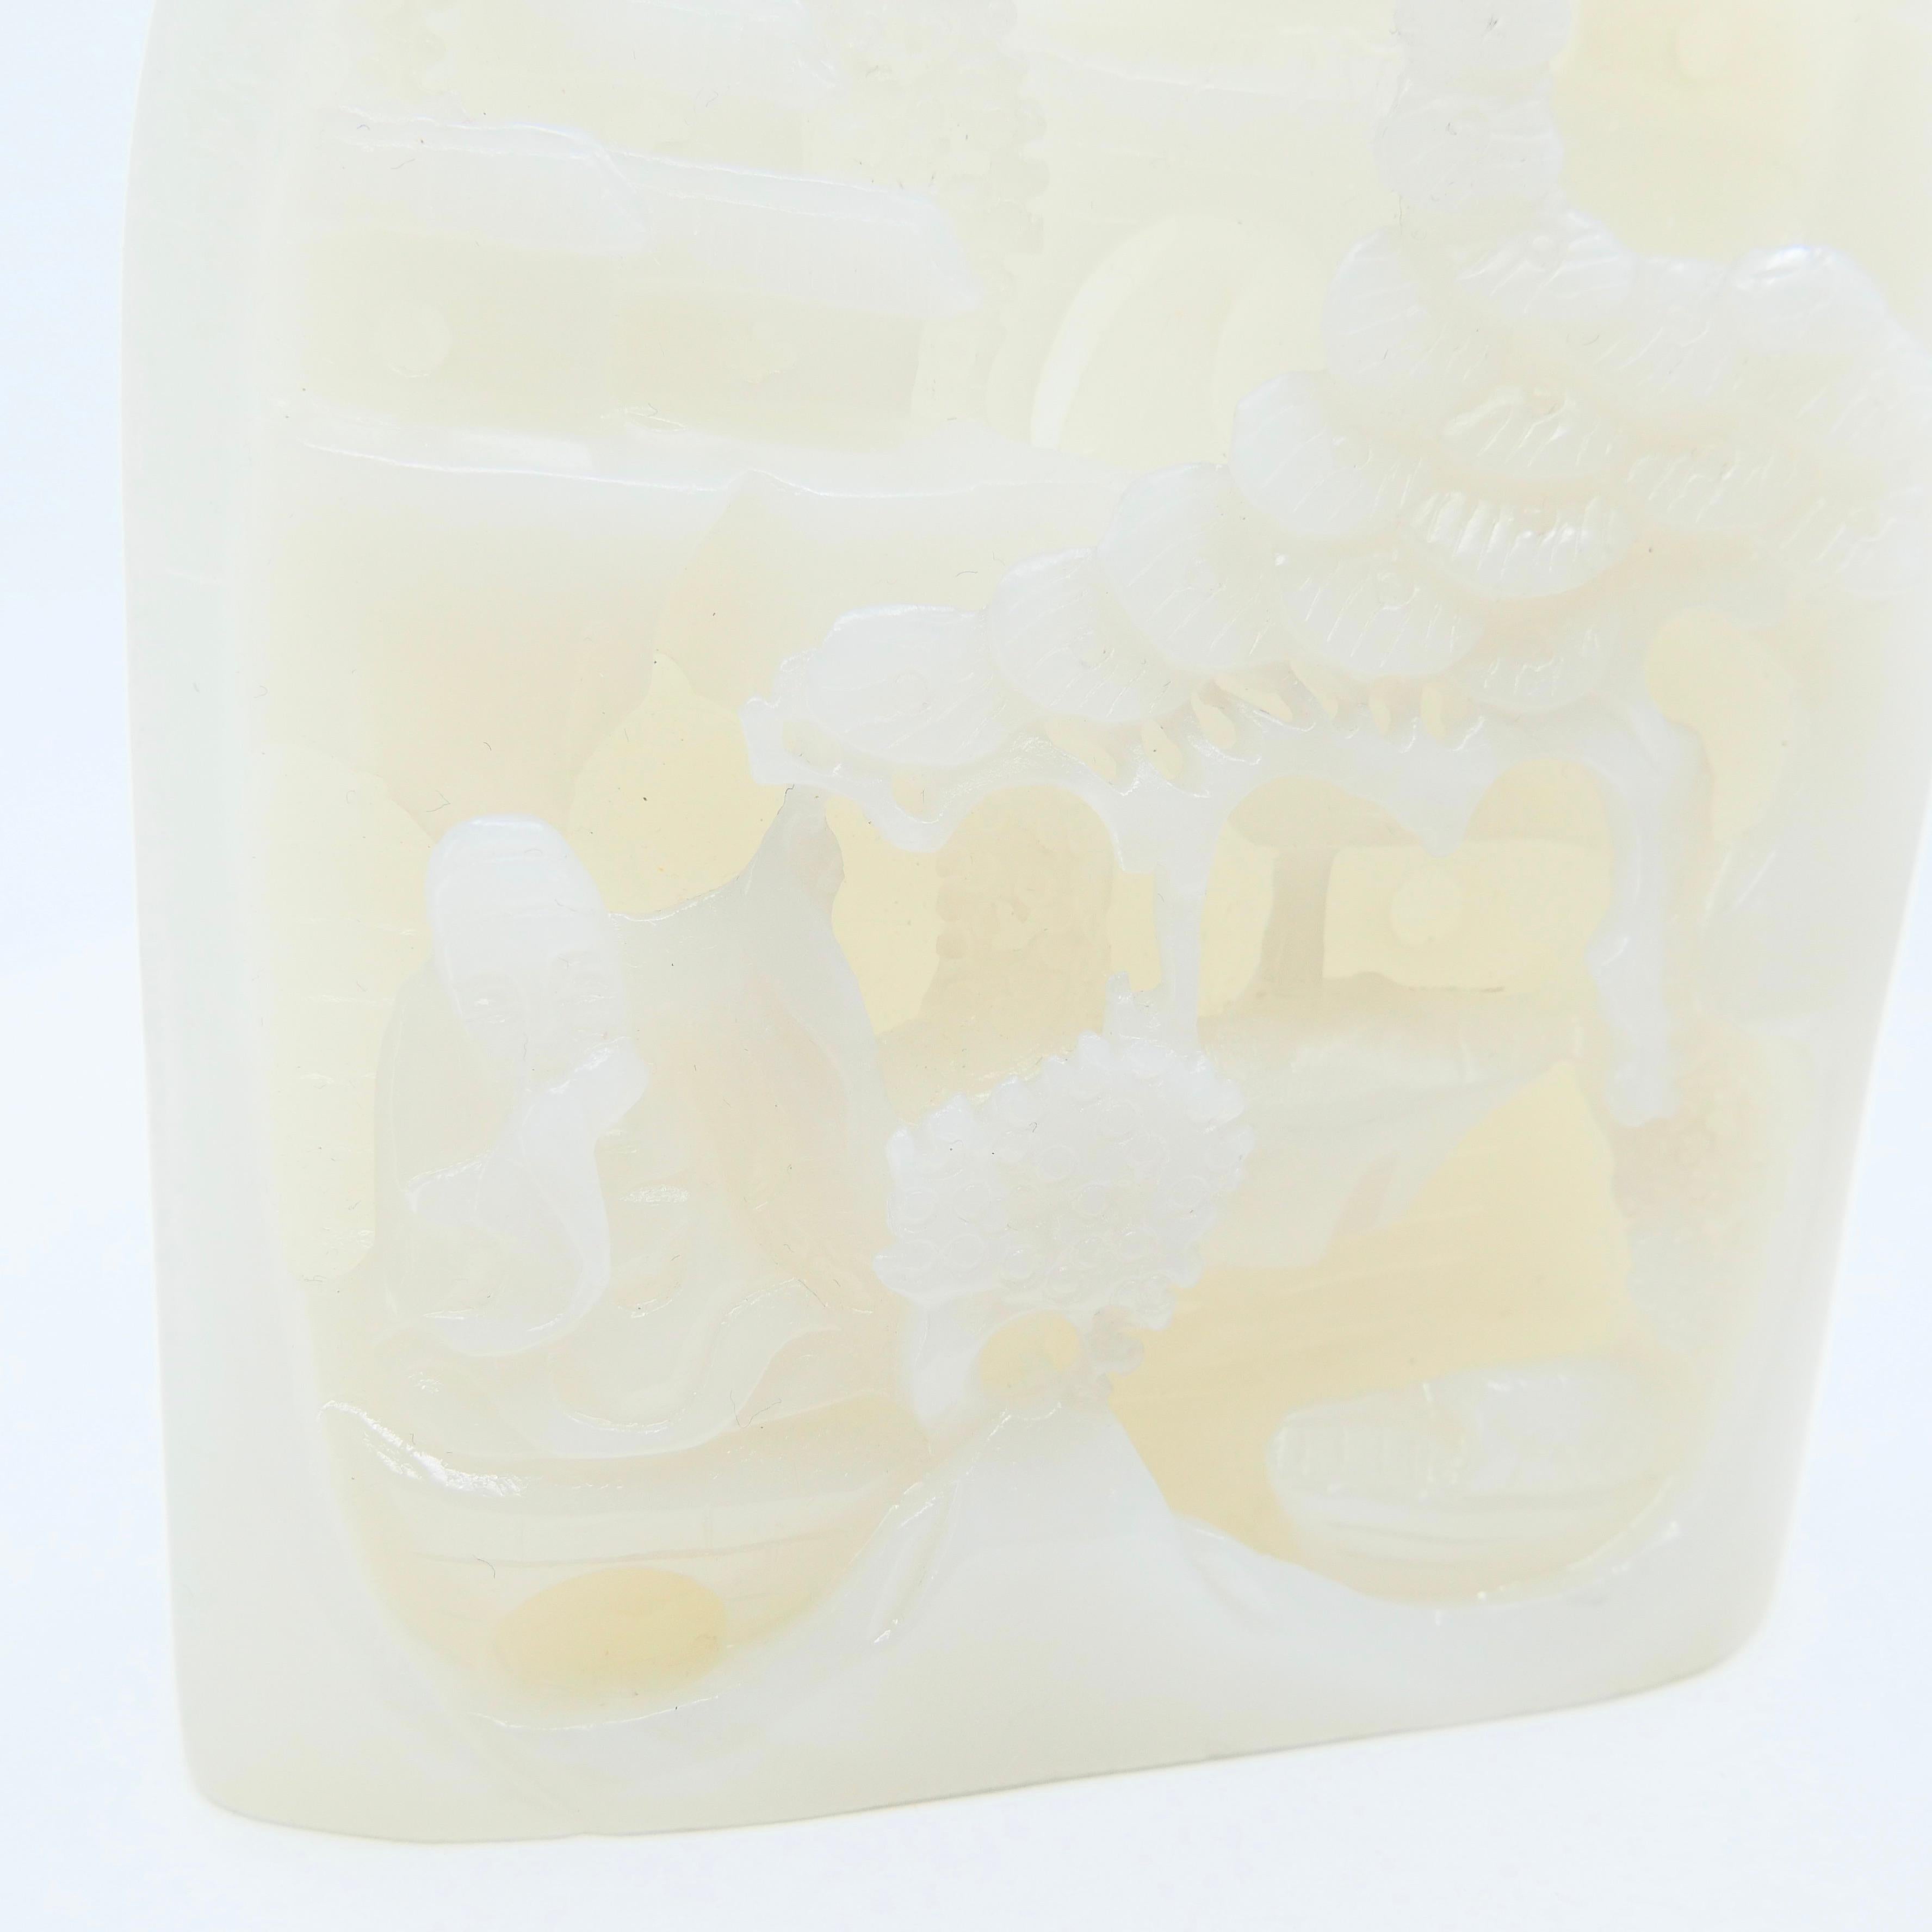 Certified Nephrite White Jade Carving, Hetian Jade, Scenic Stature For Sale 2